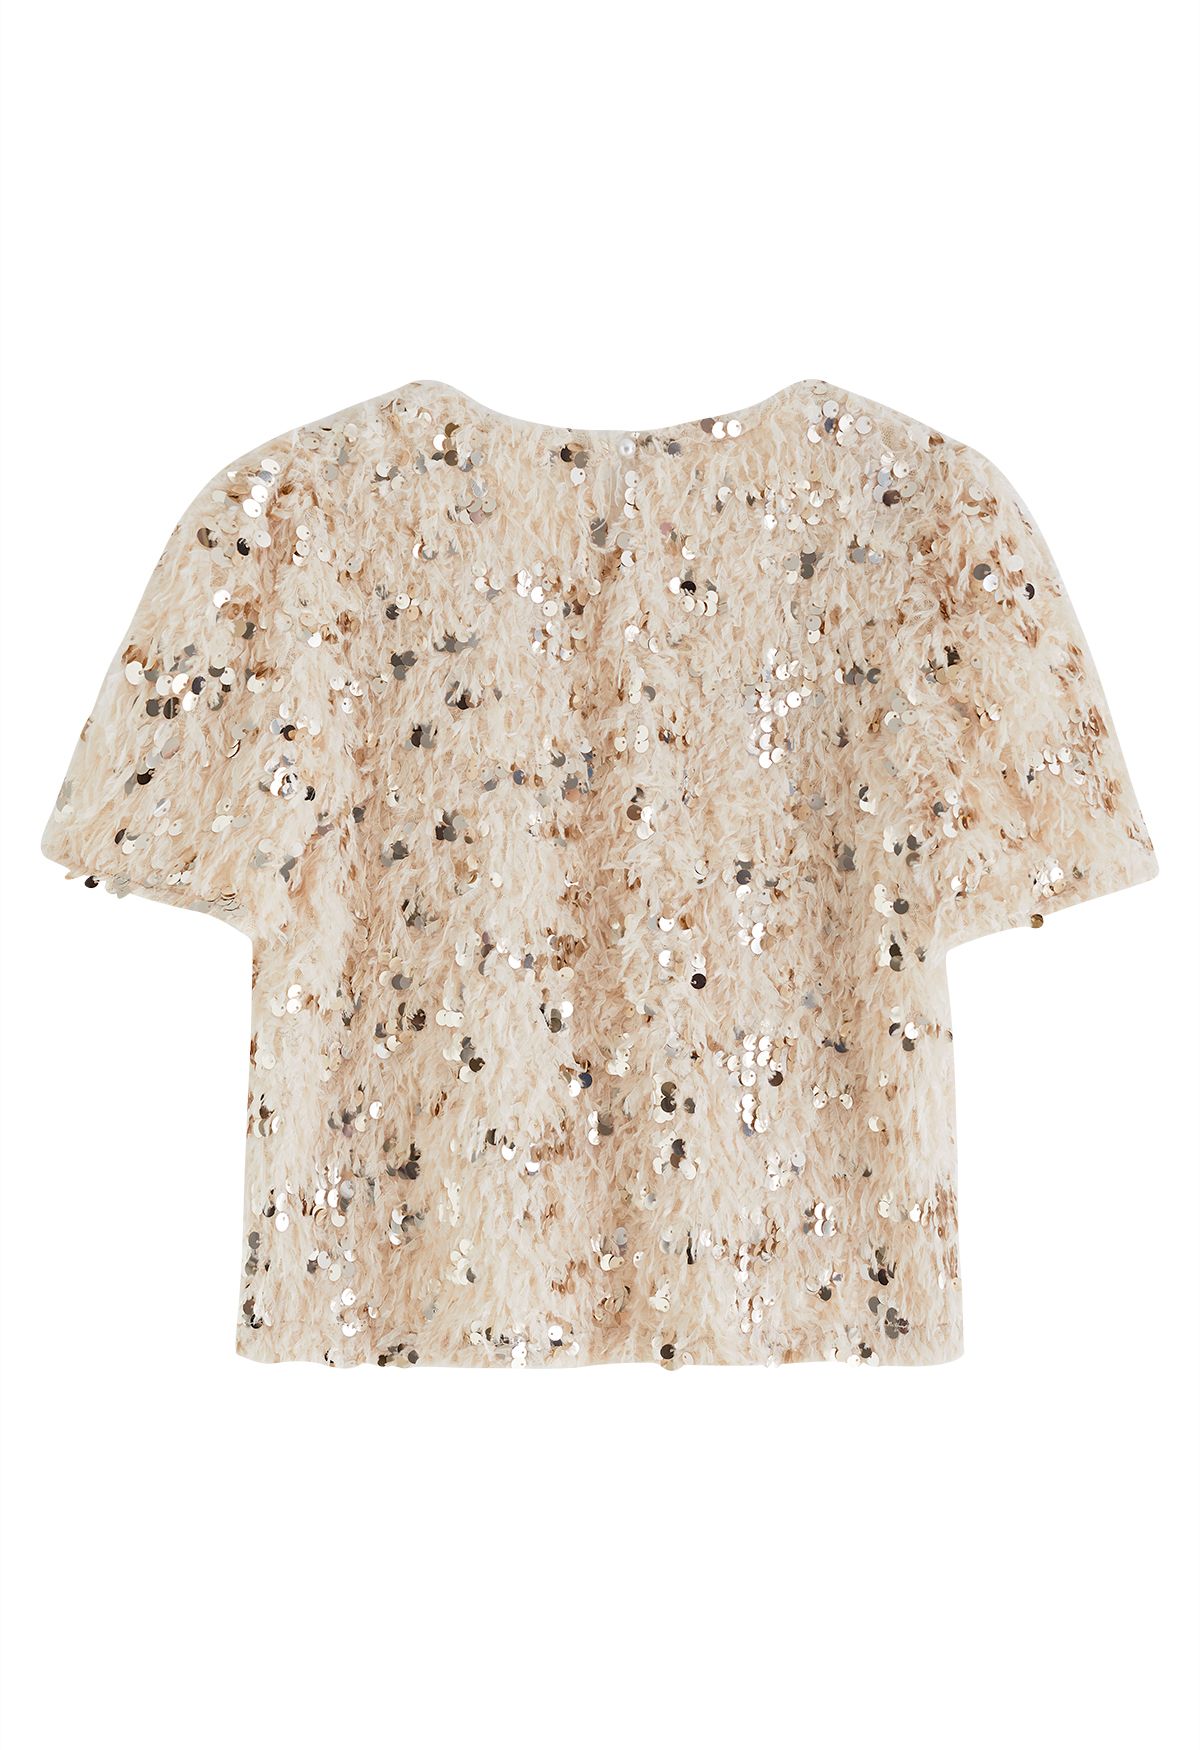 Sequin Embellished Feather Short-Sleeve Top